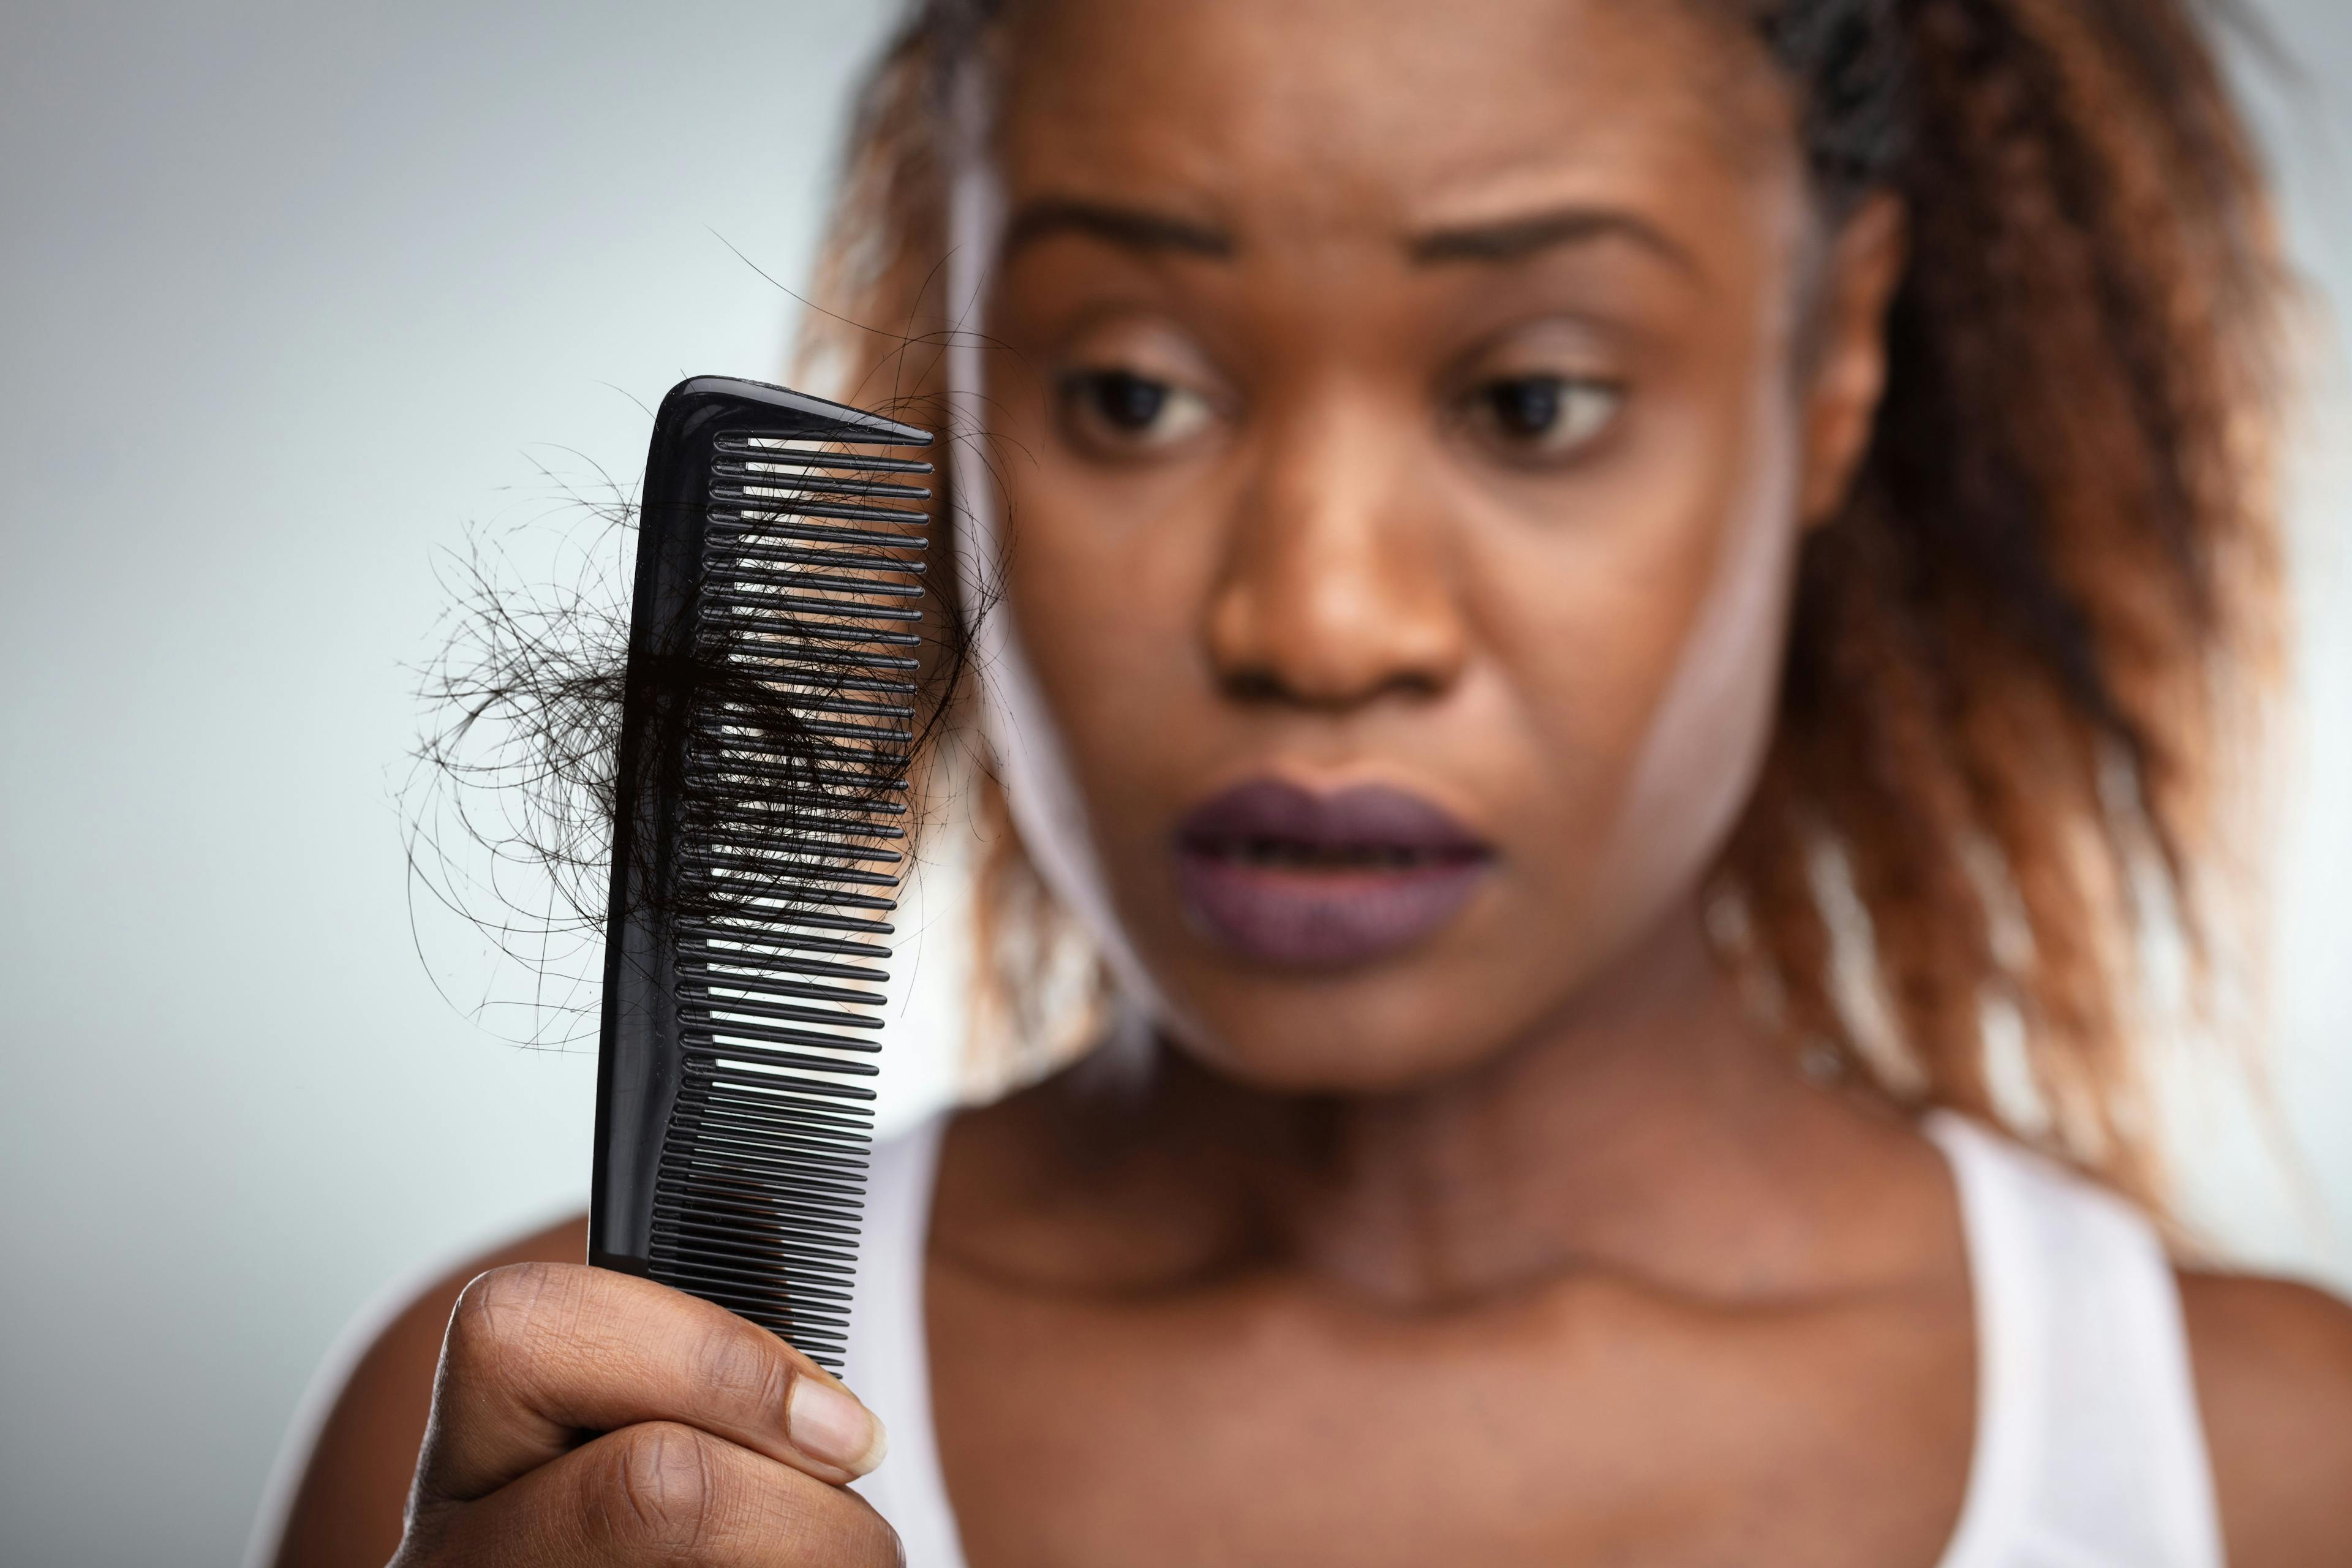 Woman worried about hair loss | Image Credit: Andrey Popov - stock.adobe.com